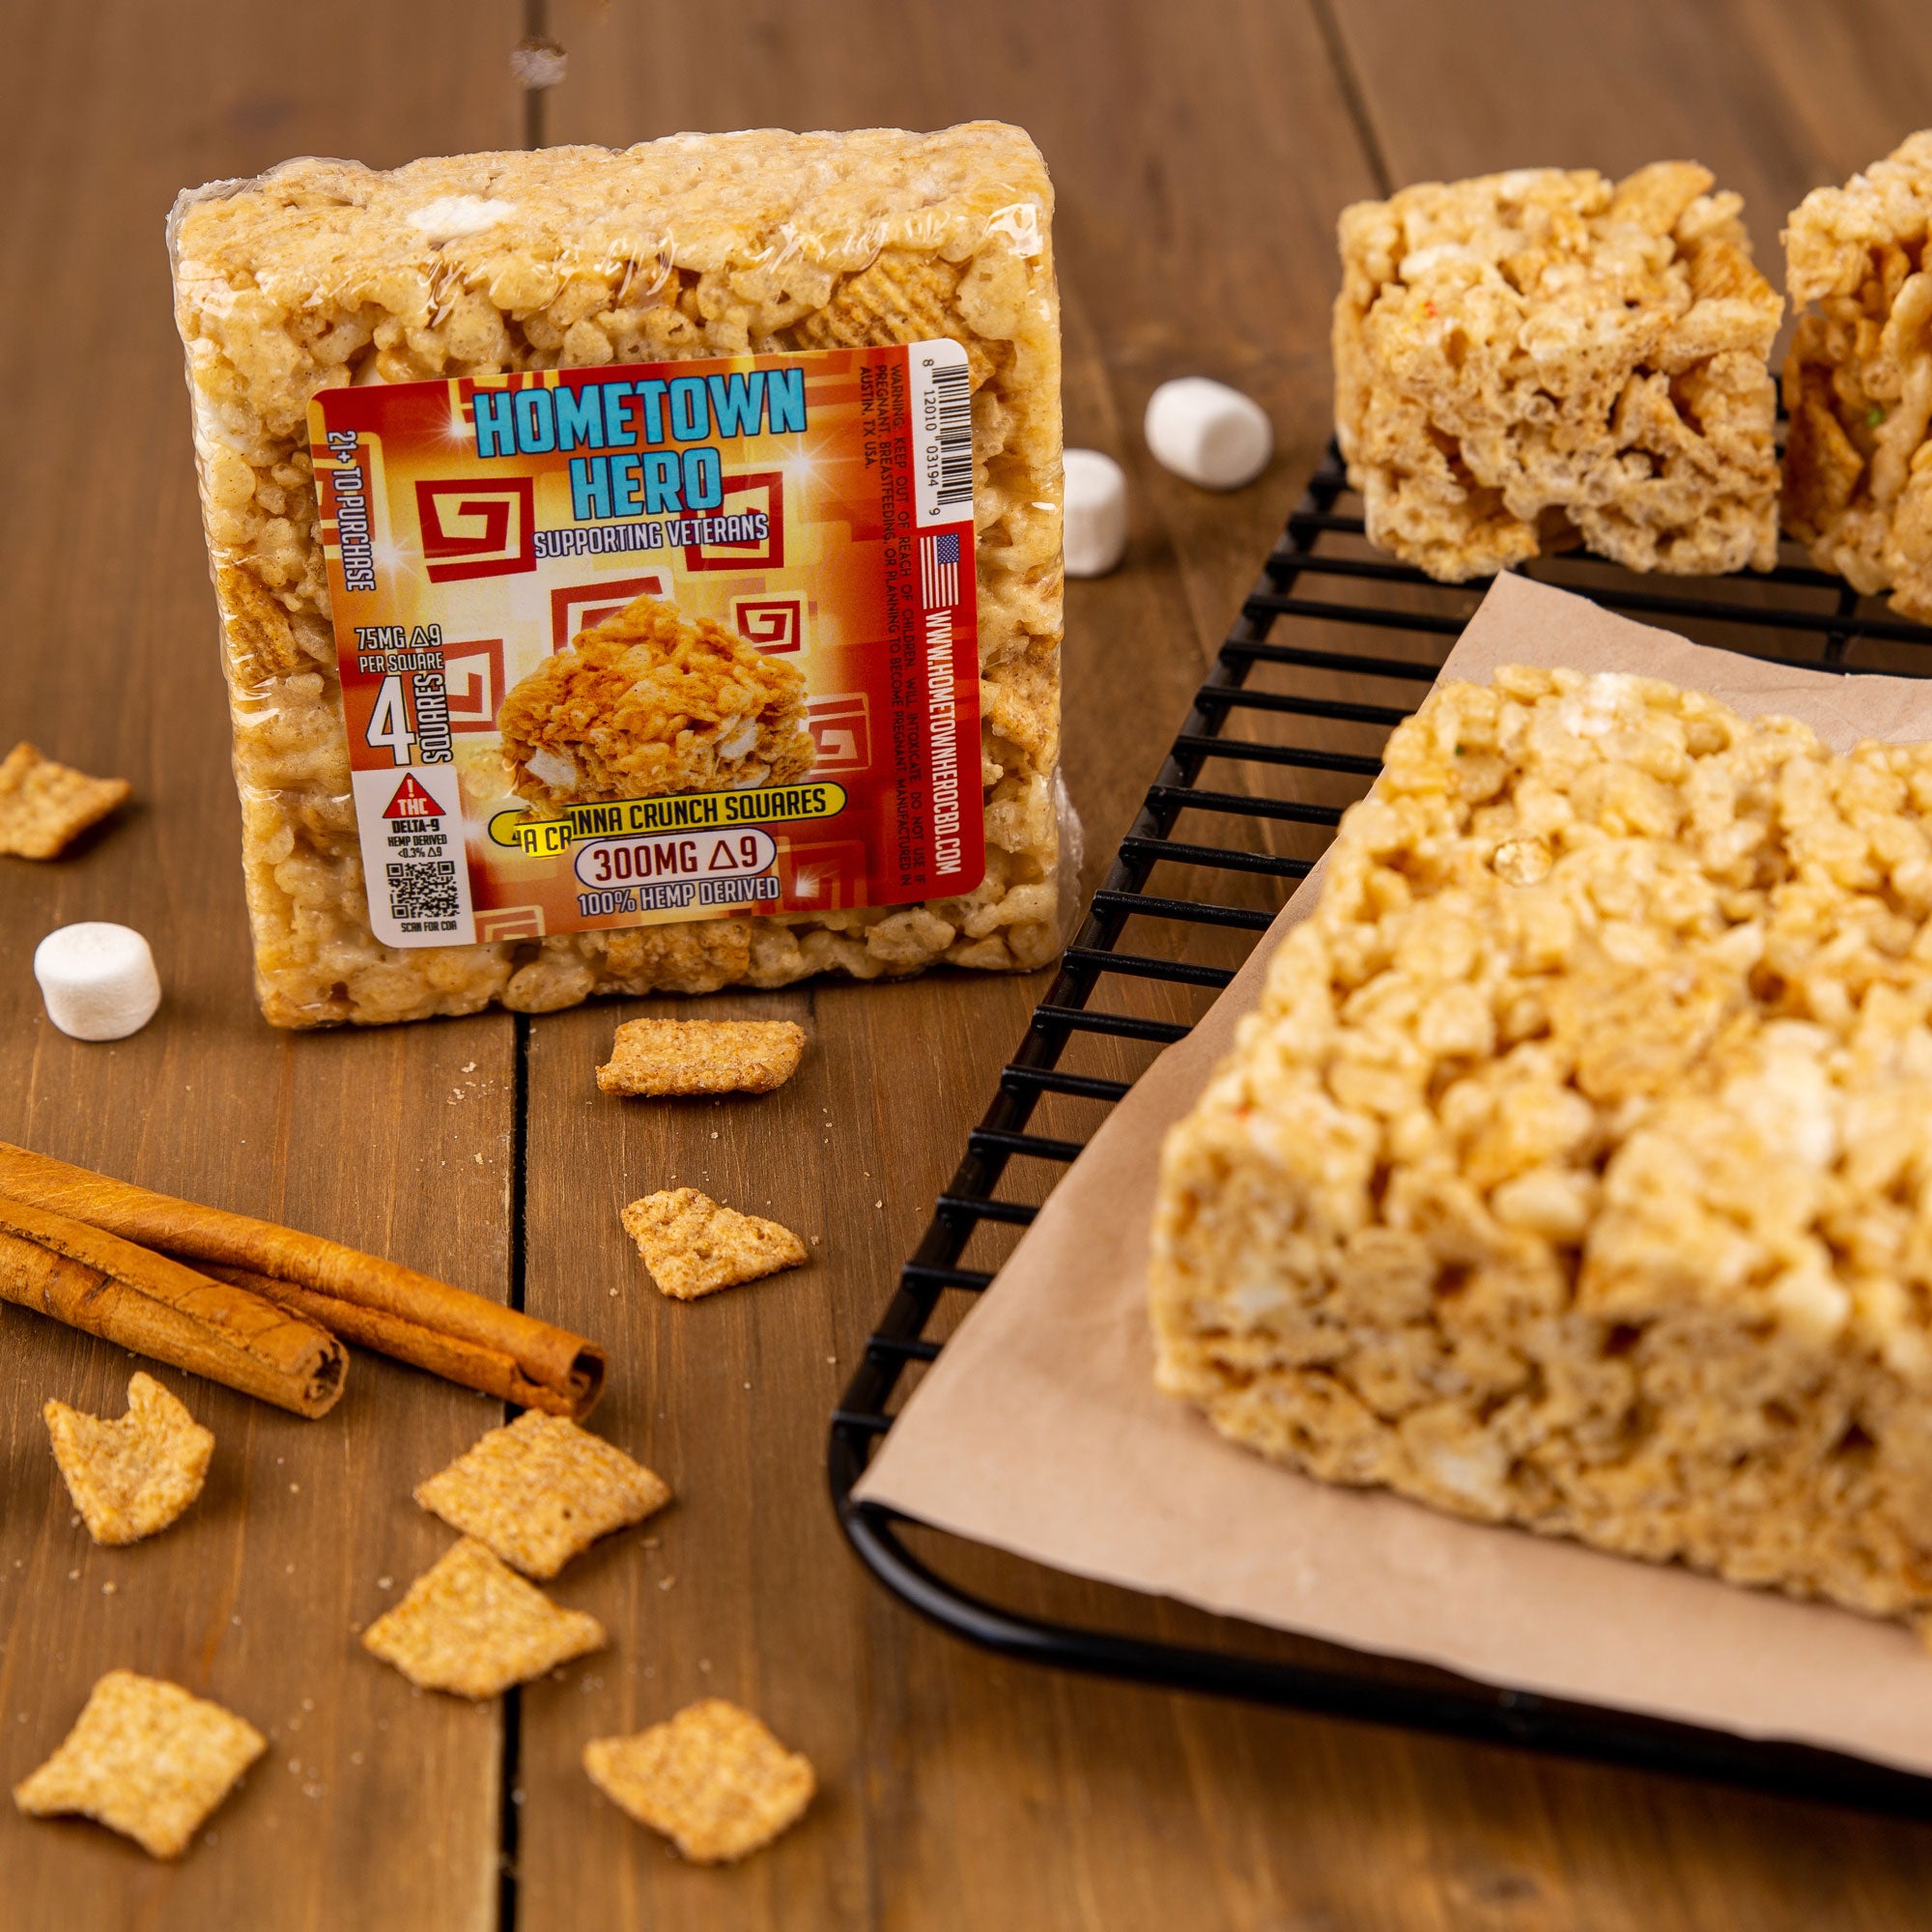 Buy 4 Get 1 FREE Delta 9 Cinna Crunch Squares on table